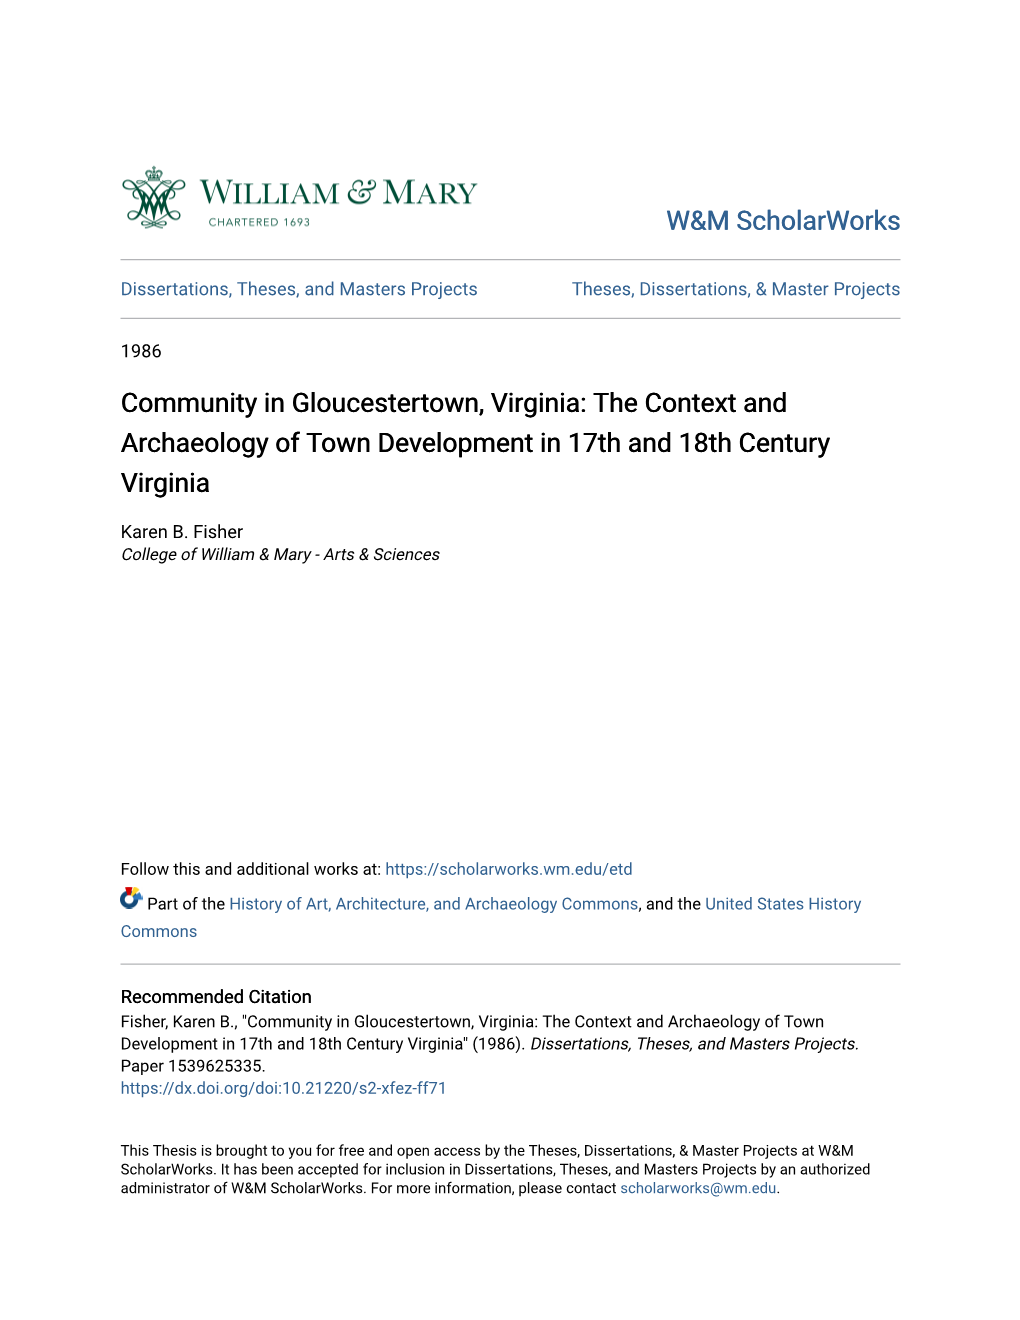 The Context and Archaeology of Town Development in 17Th and 18Th Century Virginia